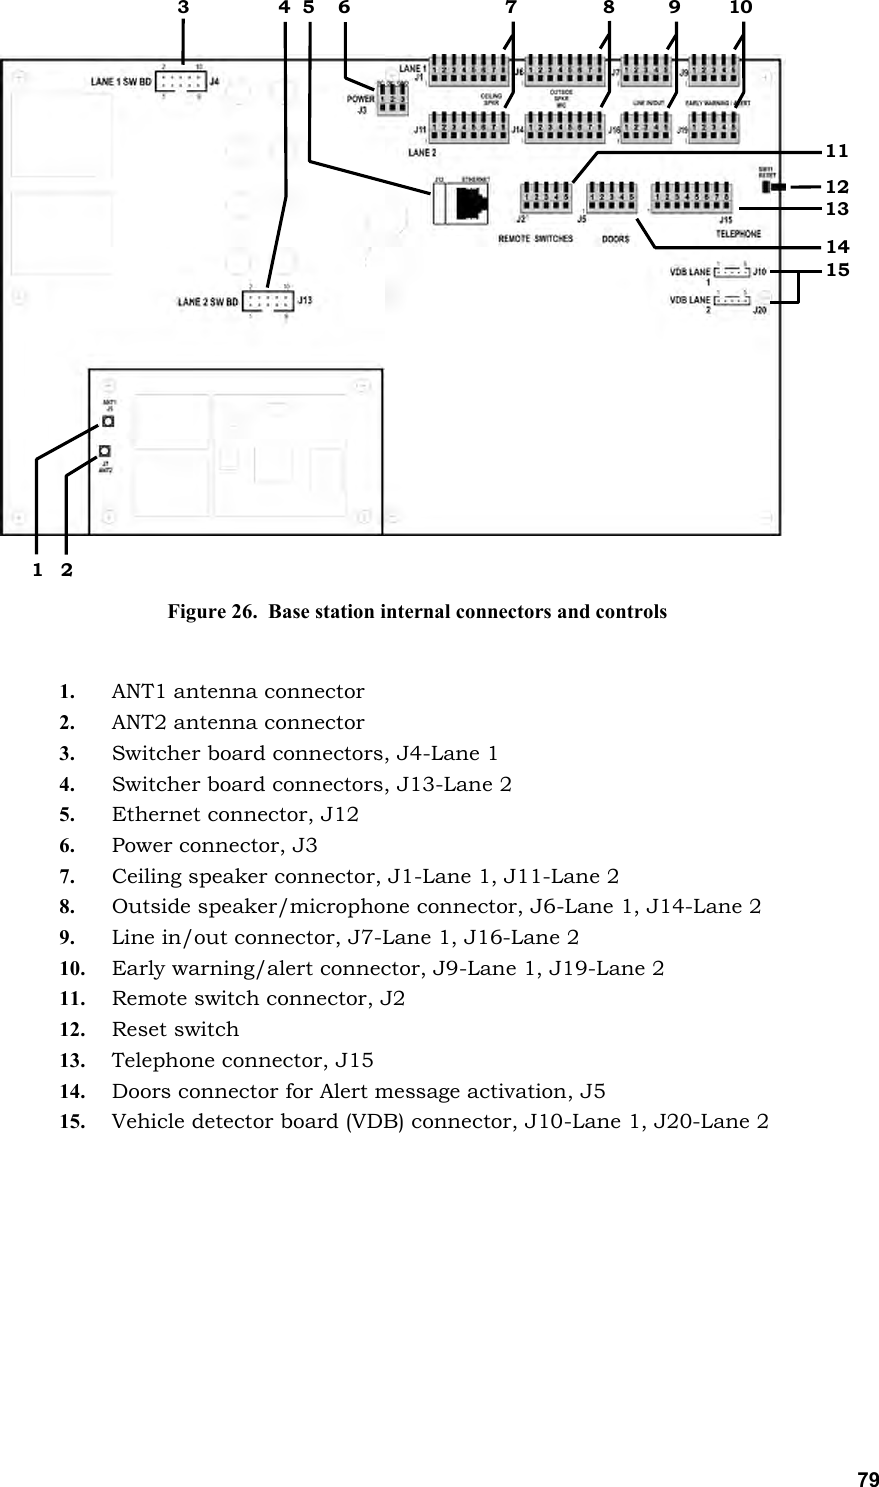   79                      1. ANT1 antenna connector 2. ANT2 antenna connector 3. Switcher board connectors, J4-Lane 1 4. Switcher board connectors, J13-Lane 2 5. Ethernet connector, J12 6. Power connector, J3 7. Ceiling speaker connector, J1-Lane 1, J11-Lane 2 8. Outside speaker/microphone connector, J6-Lane 1, J14-Lane 2 9. Line in/out connector, J7-Lane 1, J16-Lane 2 10. Early warning/alert connector, J9-Lane 1, J19-Lane 2 11. Remote switch connector, J2 12. Reset switch 13. Telephone connector, J15 14. Doors connector for Alert message activation, J5 15. Vehicle detector board (VDB) connector, J10-Lane 1, J20-Lane 2  1   2 11 12 13 14 15 3               4  5    6                          7              8         9        10 Figure 26.  Base station internal connectors and controls 